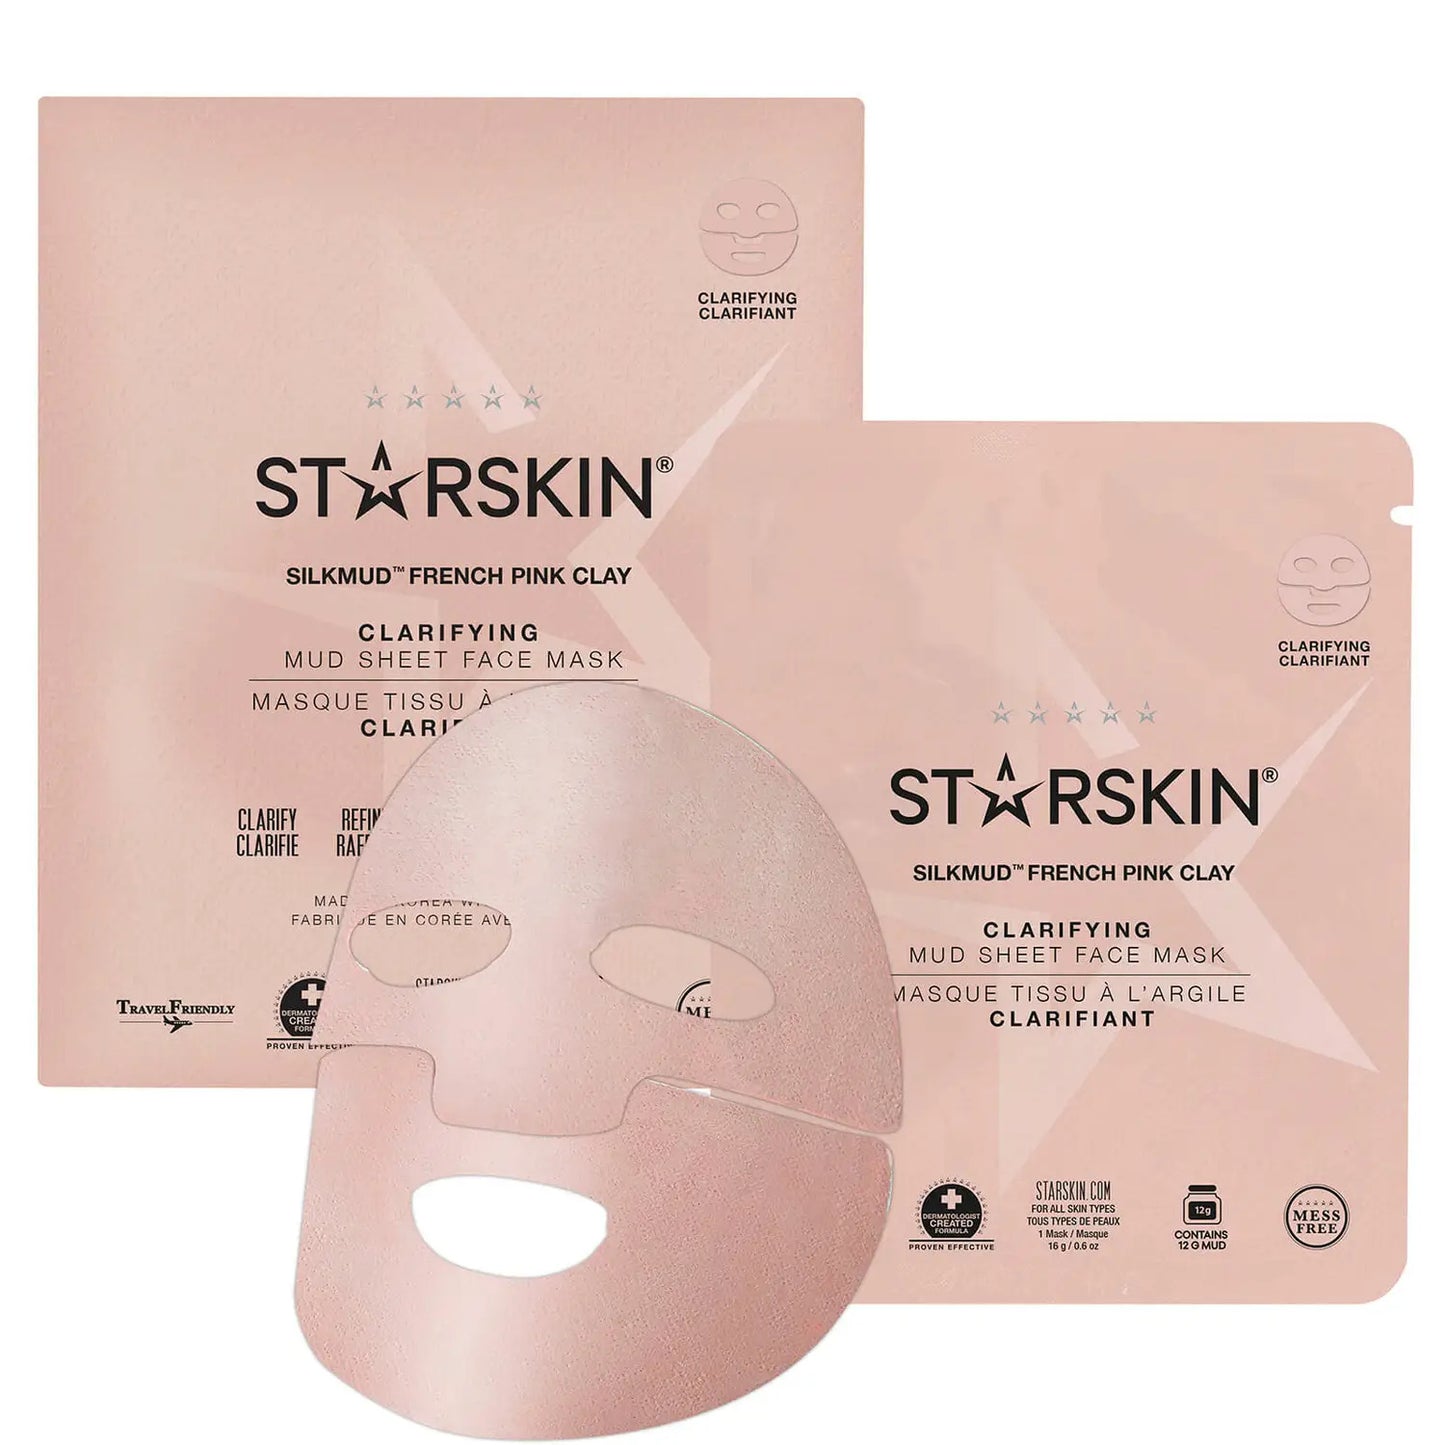 Starskin silkmud French pink clay face mask.